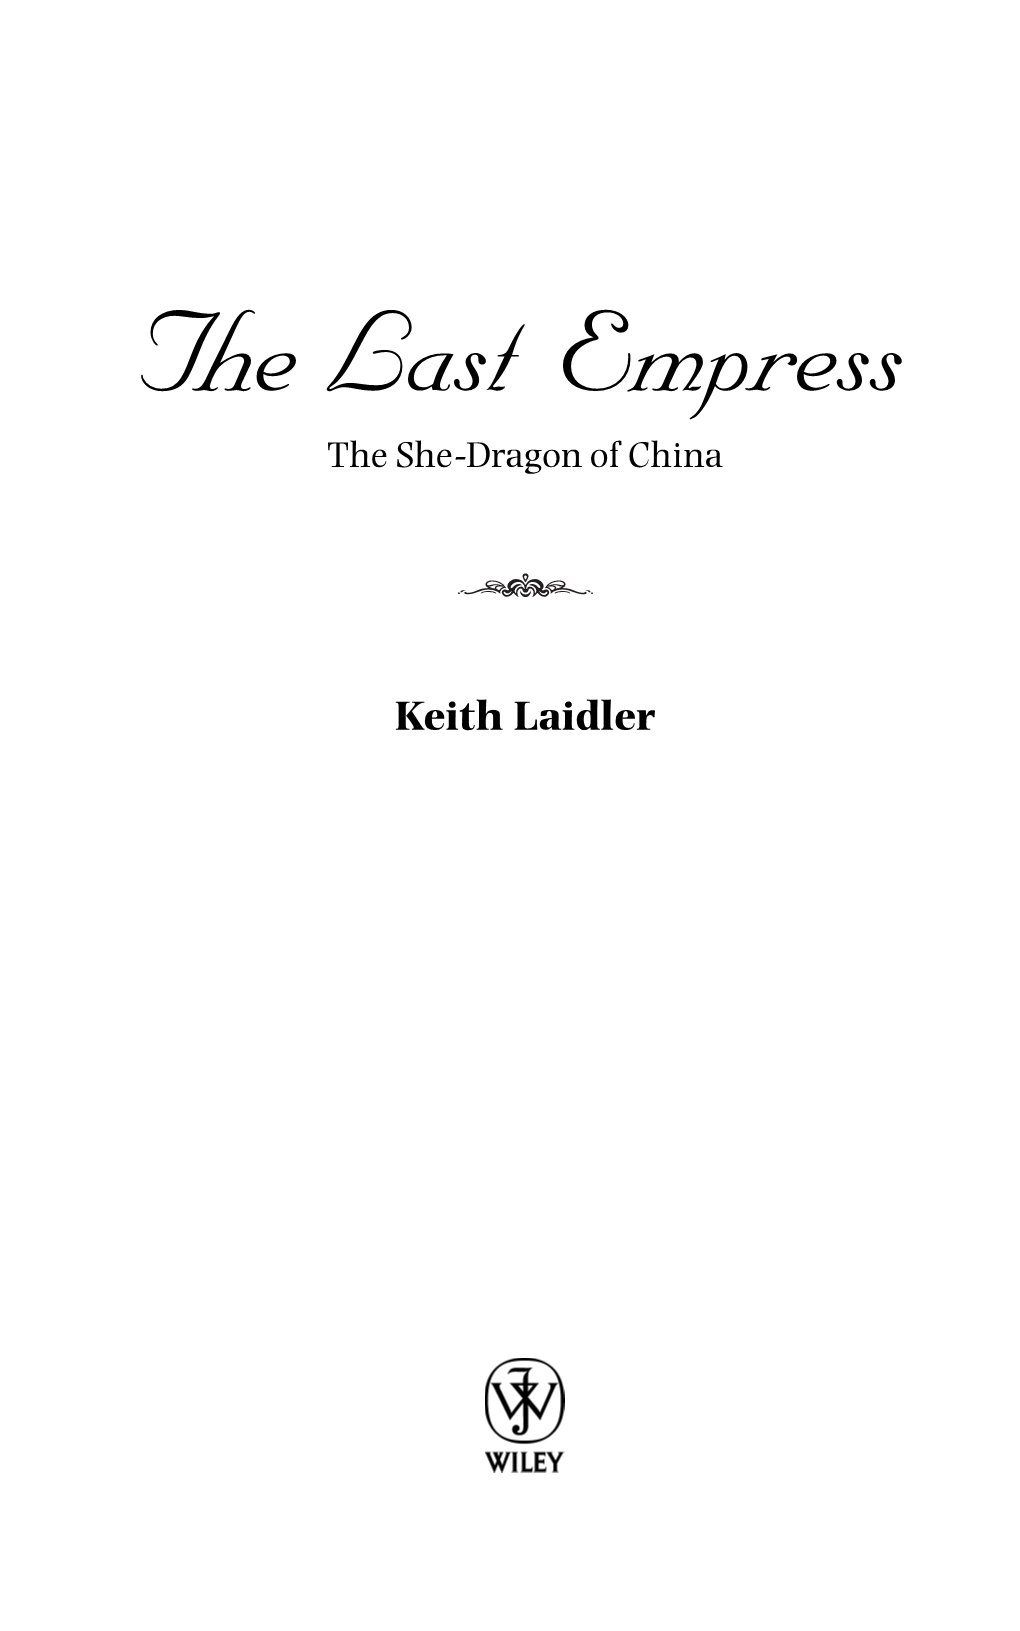 The Last Empress the She-Dragon of China